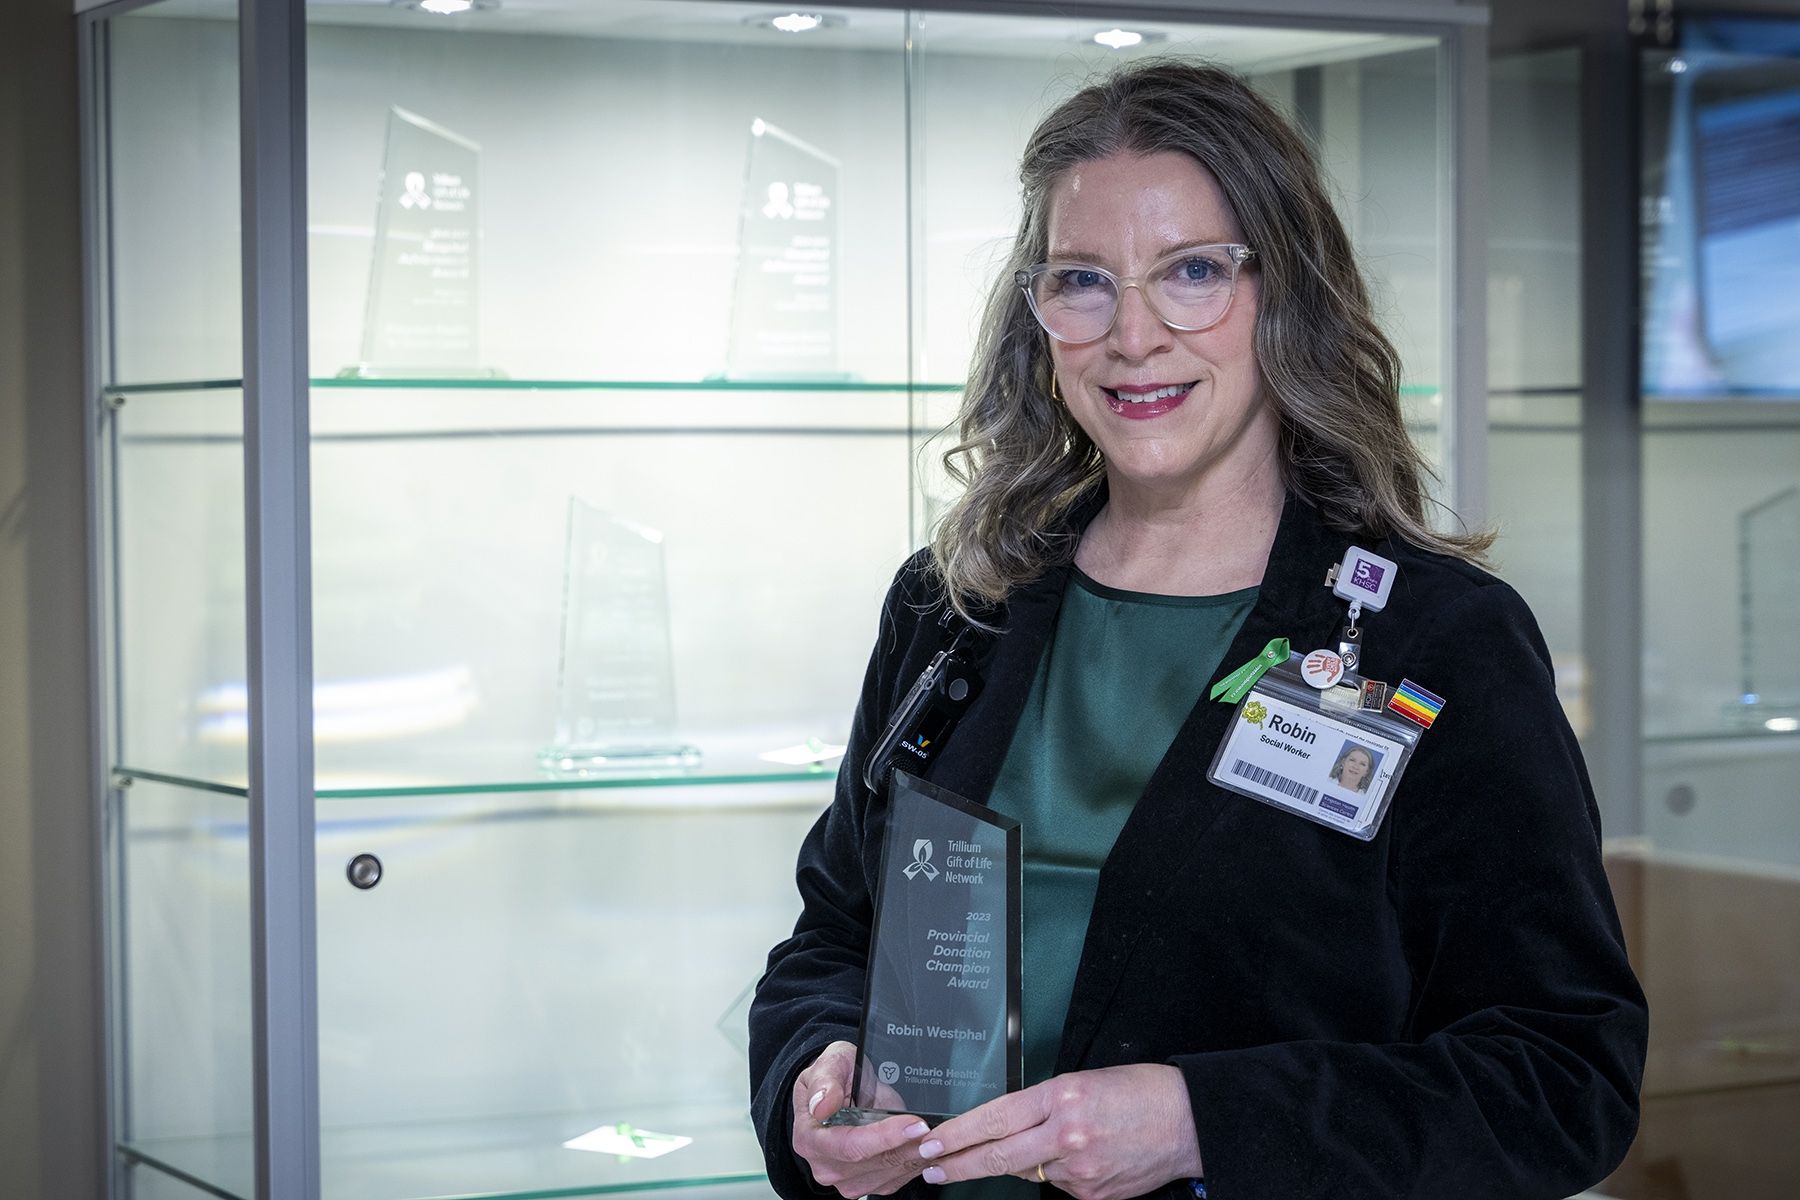 Robin Westphal is pictured standing in front of an awards display at Kingston General Hospital, holding her 2023 Provincial Donor Champion Award in her hands. Robin has dirty blonde hair with grey streaks, blue eyes and wears glasses. She’s wearing a green blouse with a black blazer on top.